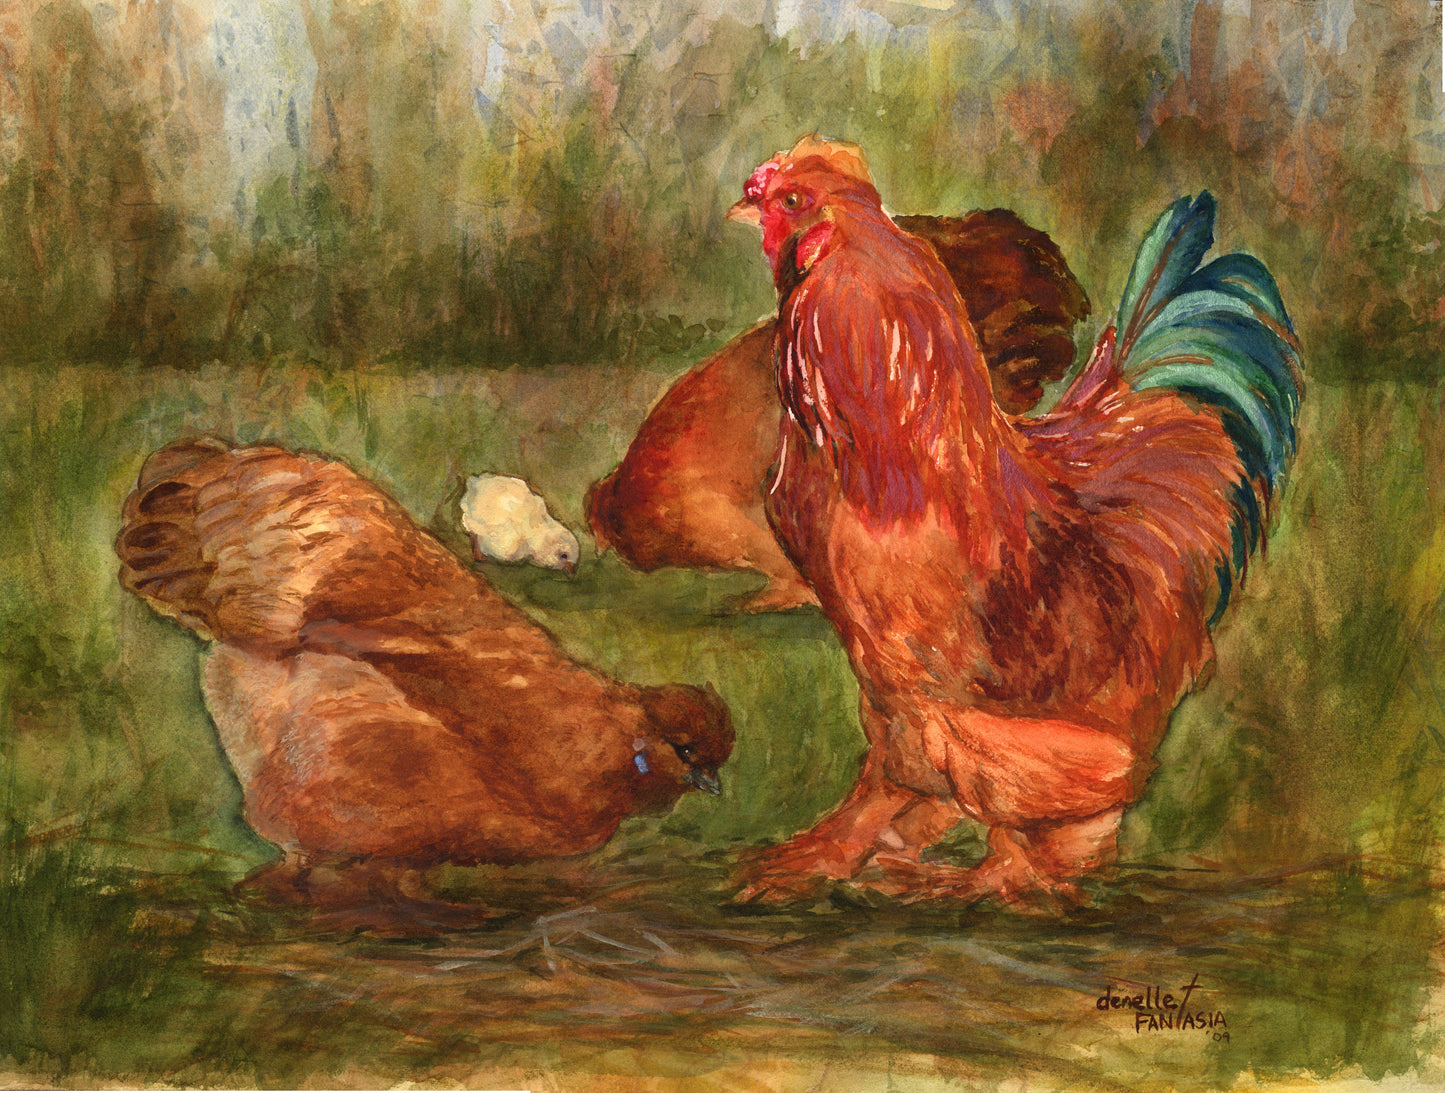 These are chickens at my little farm. I used platic wrap to create the background. Lots of fun to create the painting and to watch the chickens.